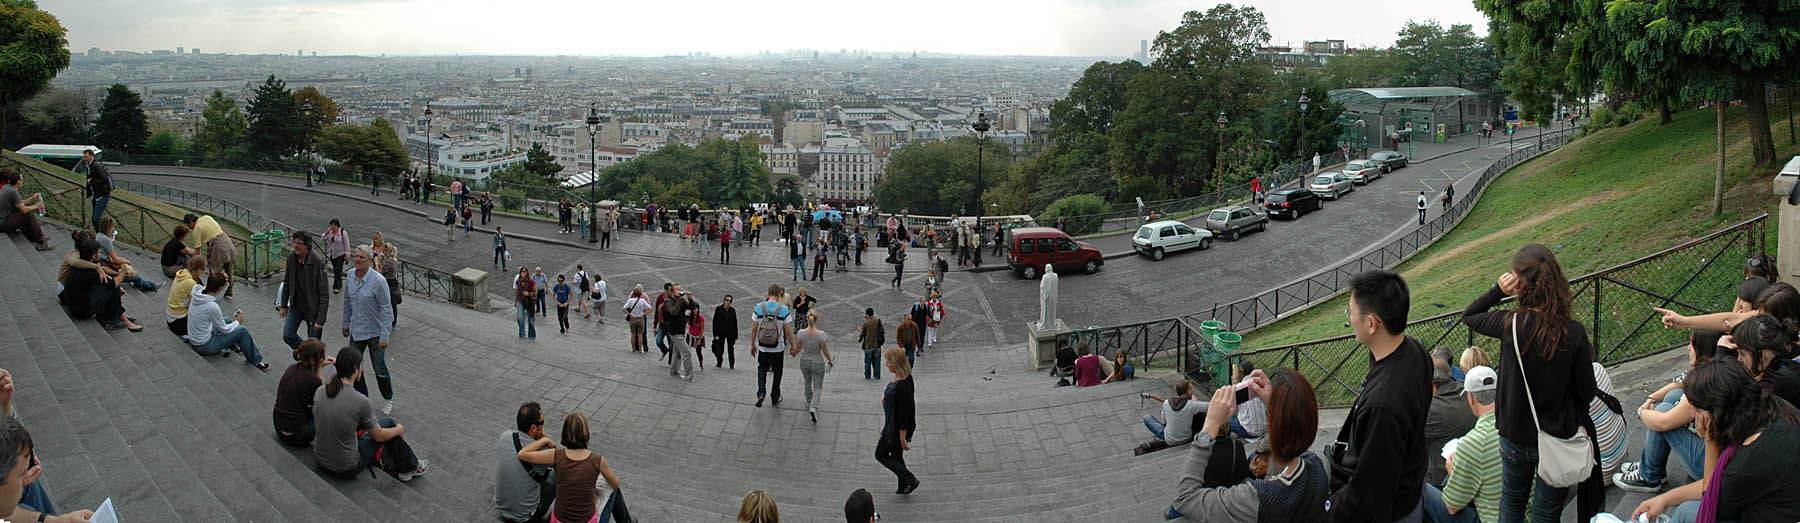 View from Sacr Coeur